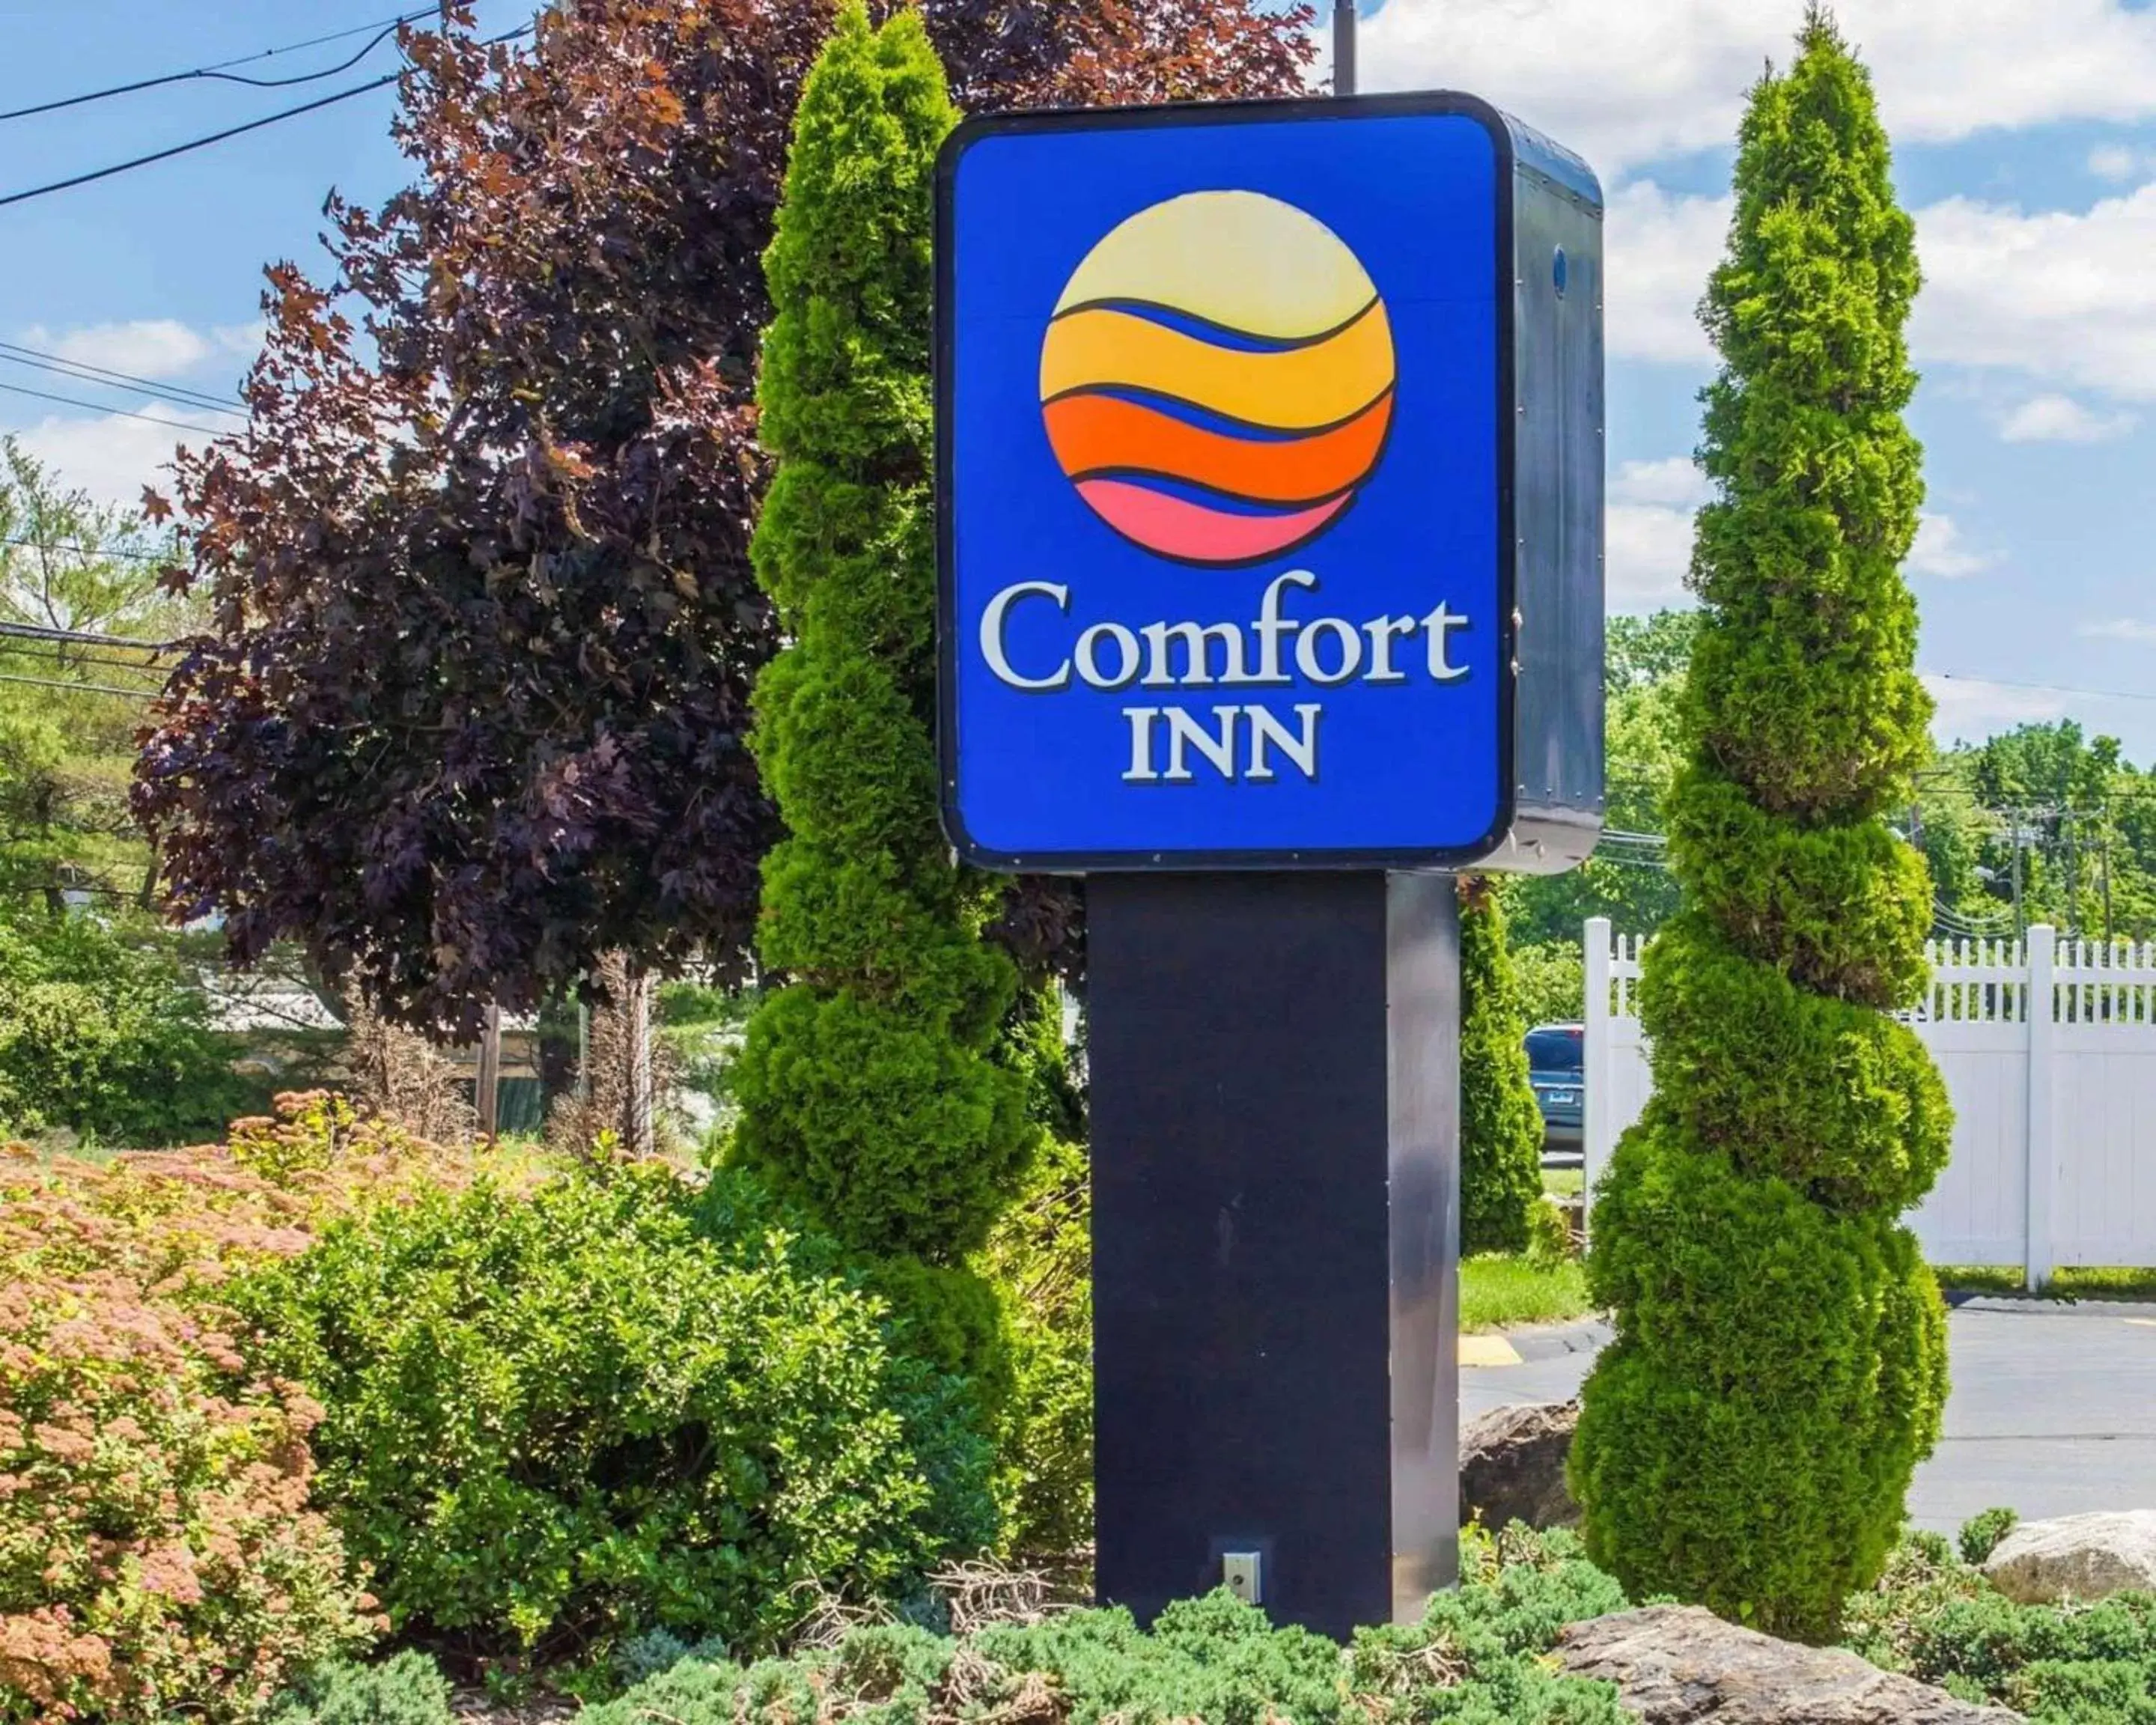 Property building in Comfort Inn Guilford near I-95